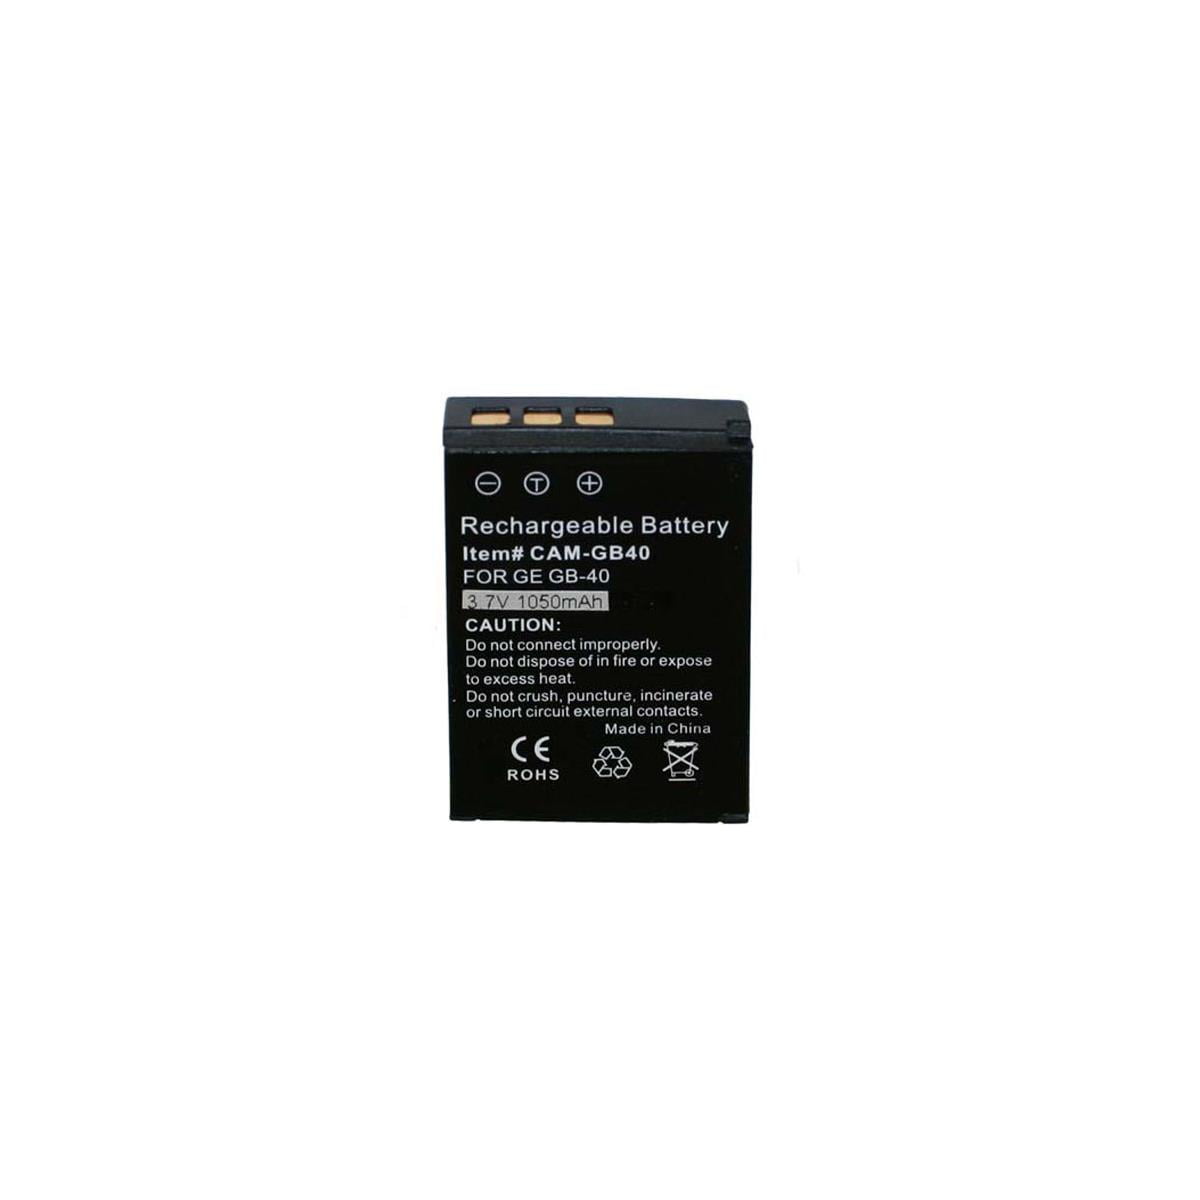 1050mAh Replacement for General Imaging E1235 E1240 P/N GB-40 E850 Battery 